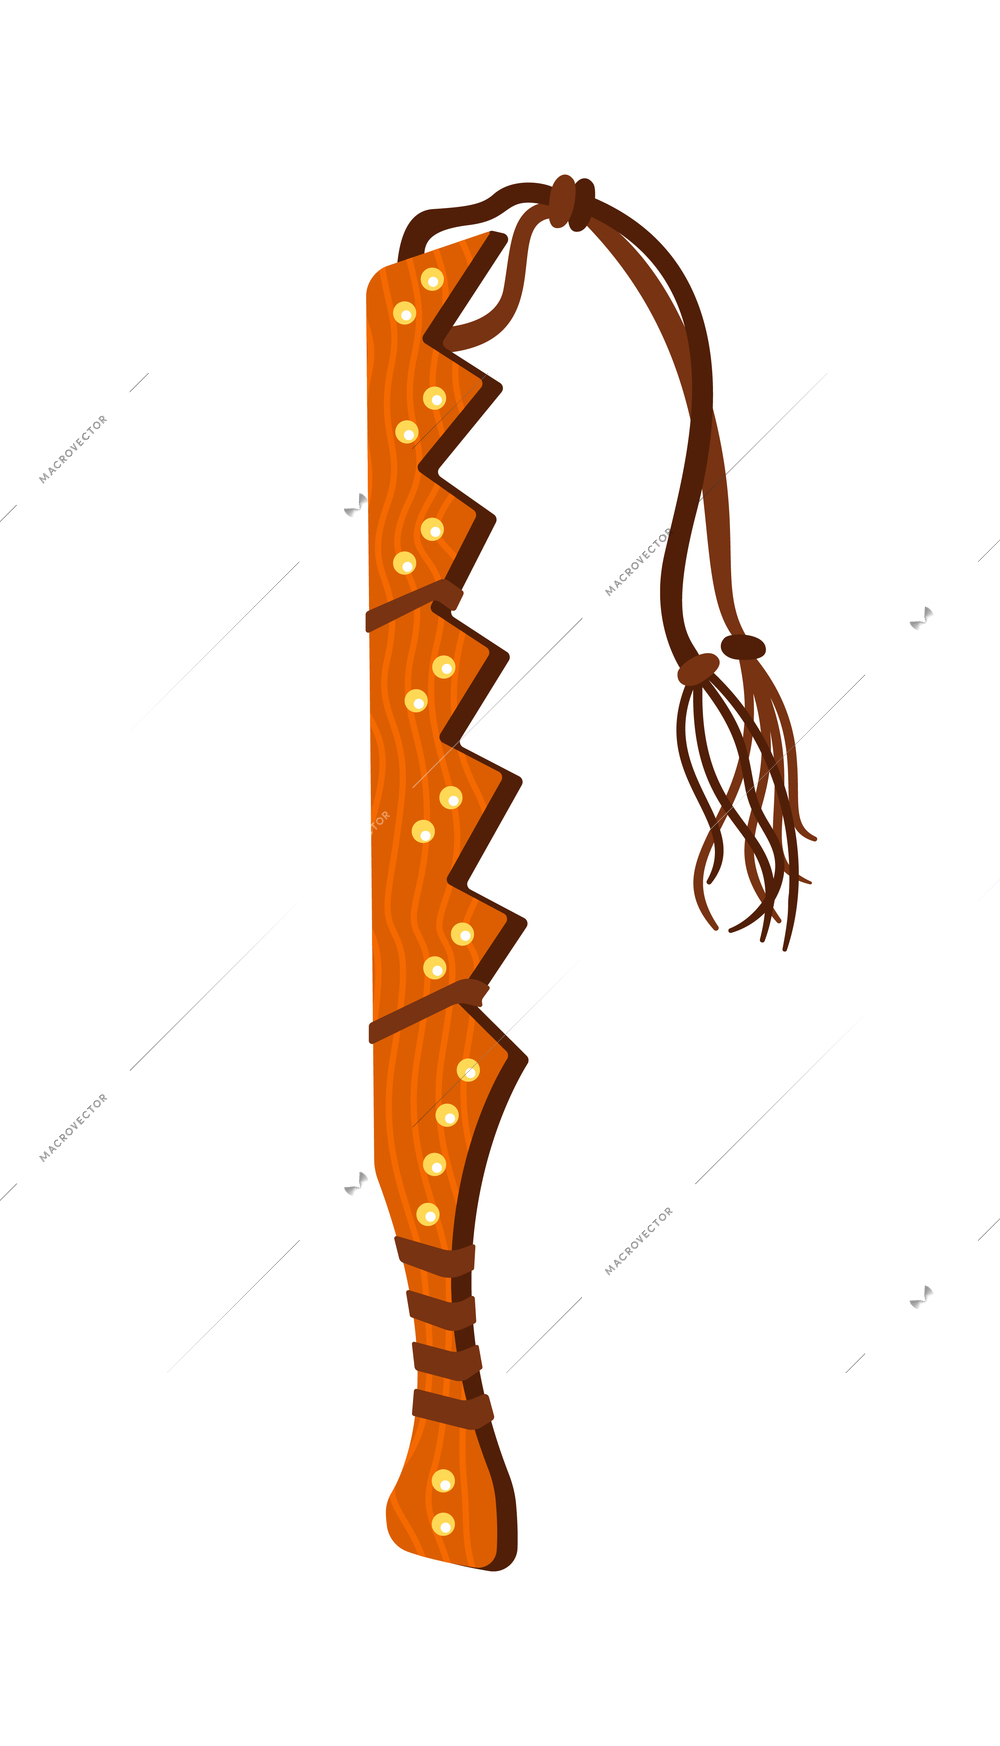 Maya civilization culture composition with isolated image of ancient flogger vector illustration